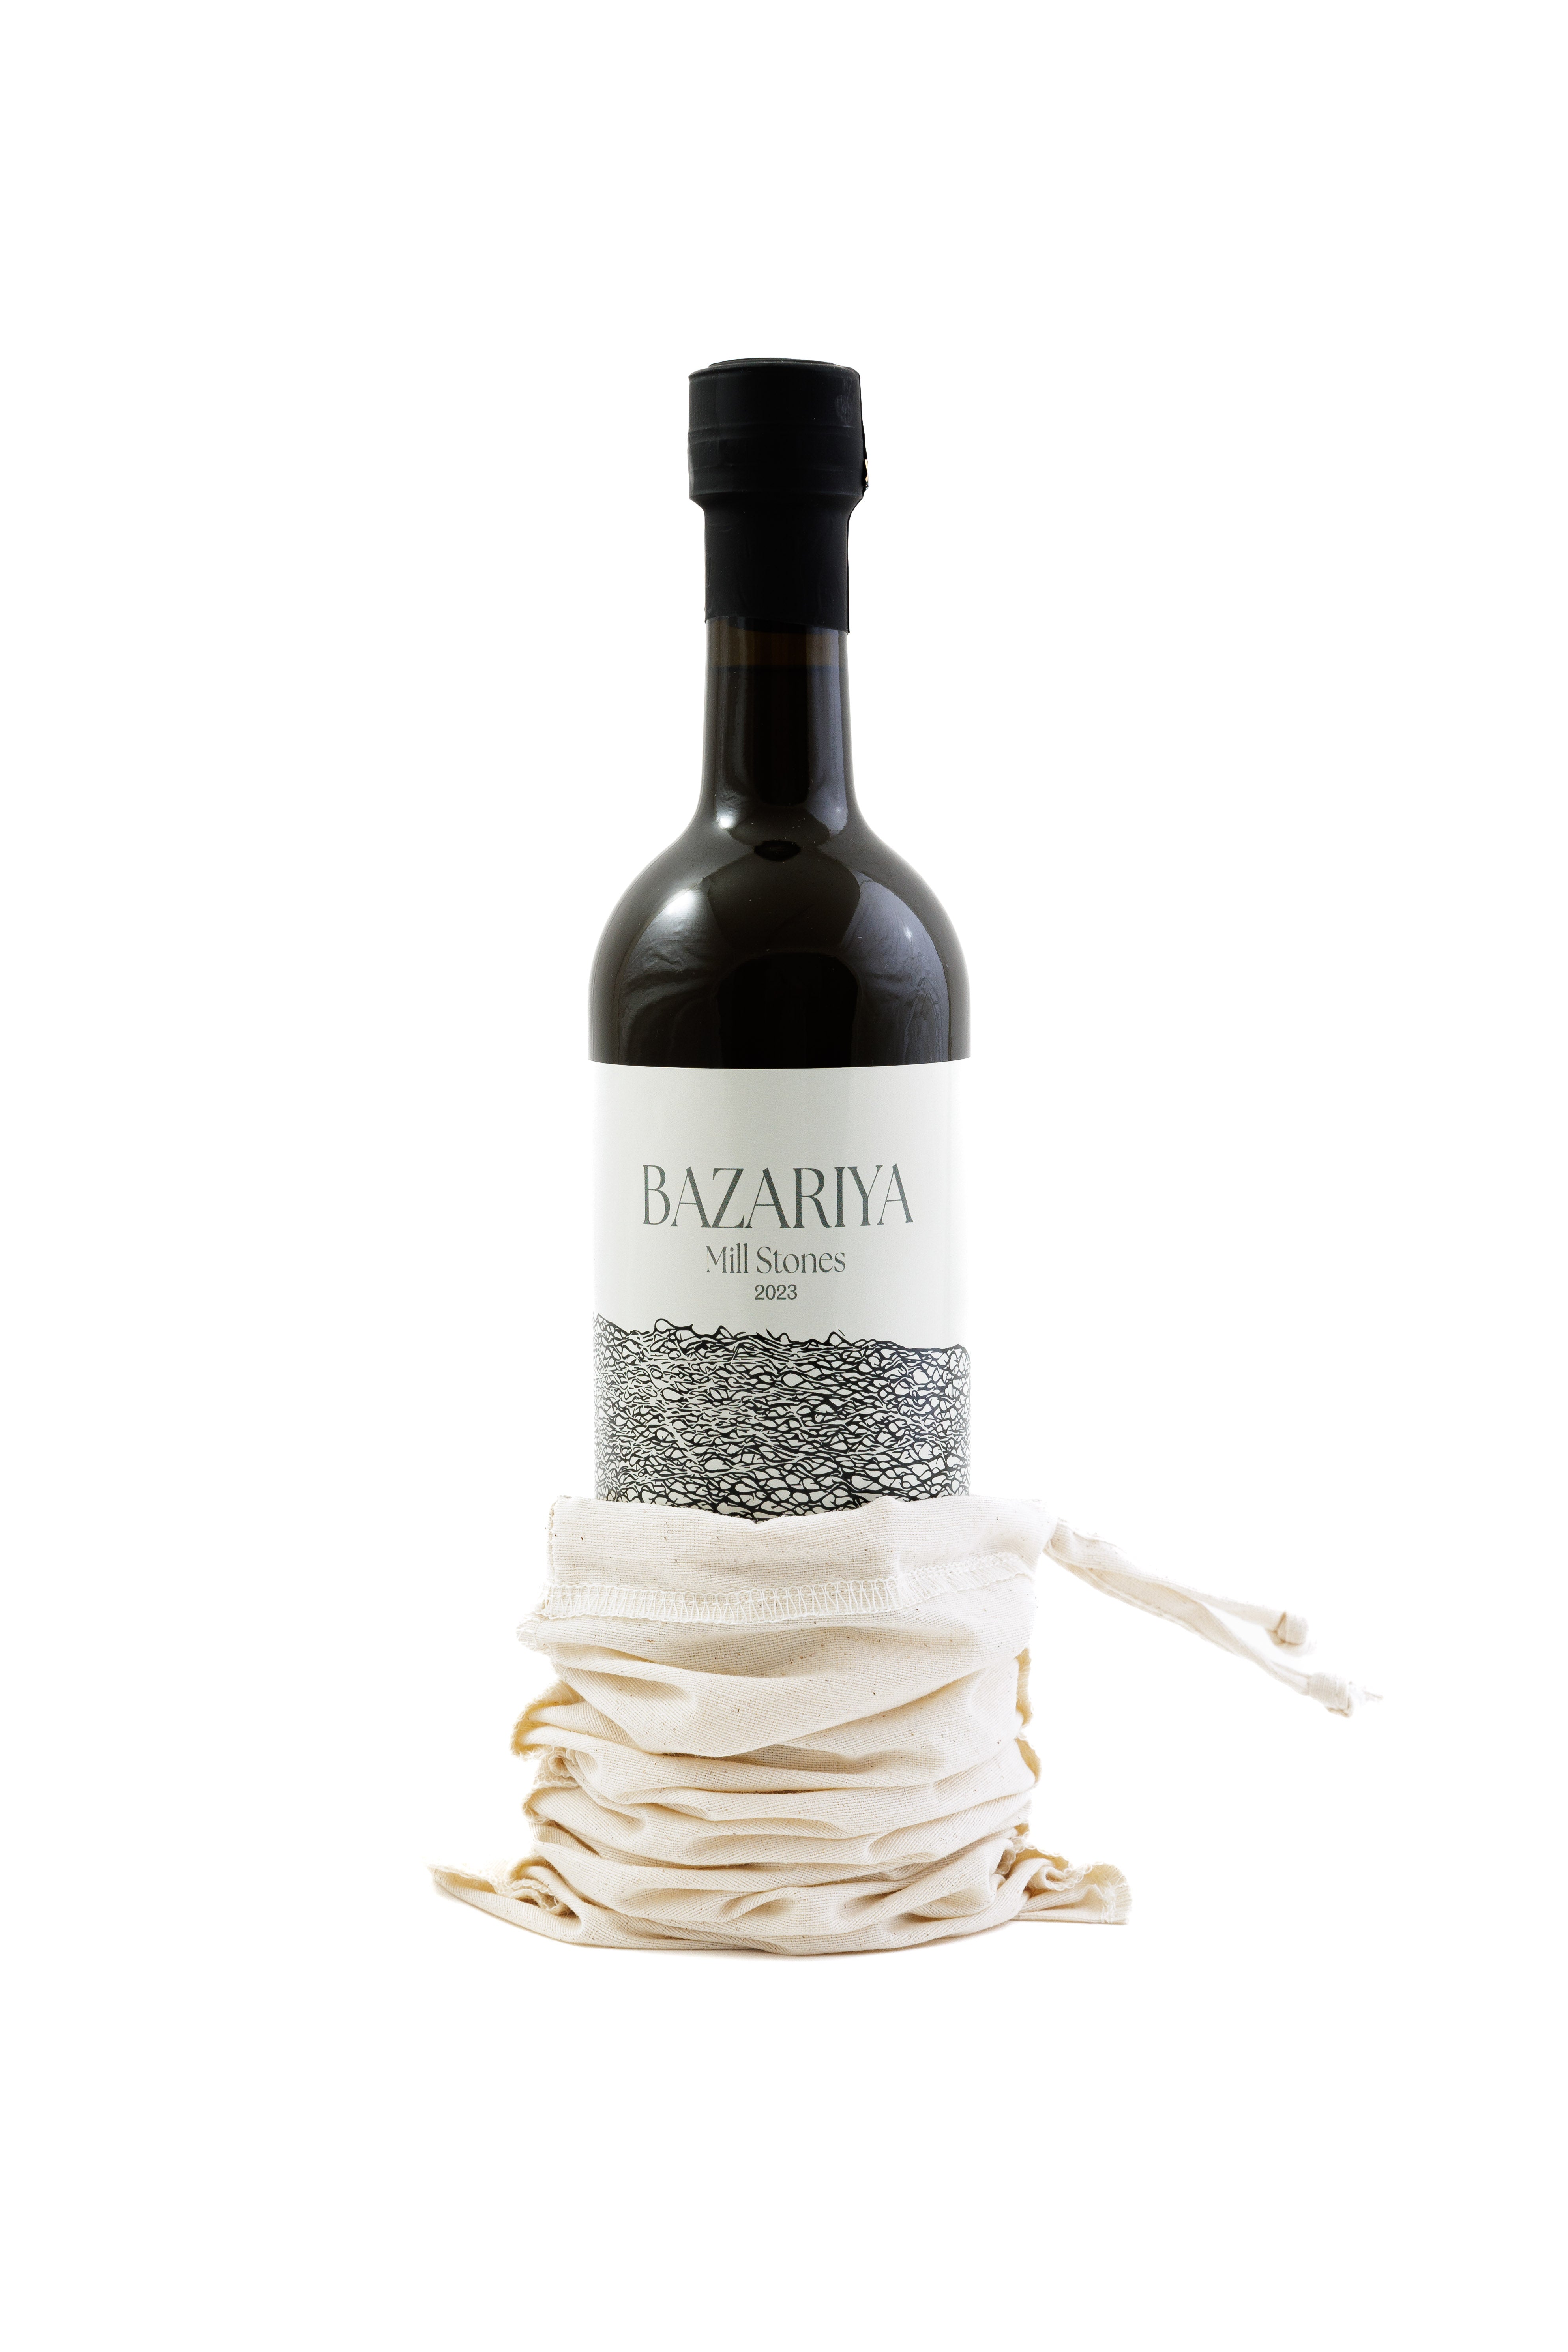 Bazariya's Millstone Extracted Olive Oil - Aromatic, Zesty, and Fruity [Harvest Year: 2023]